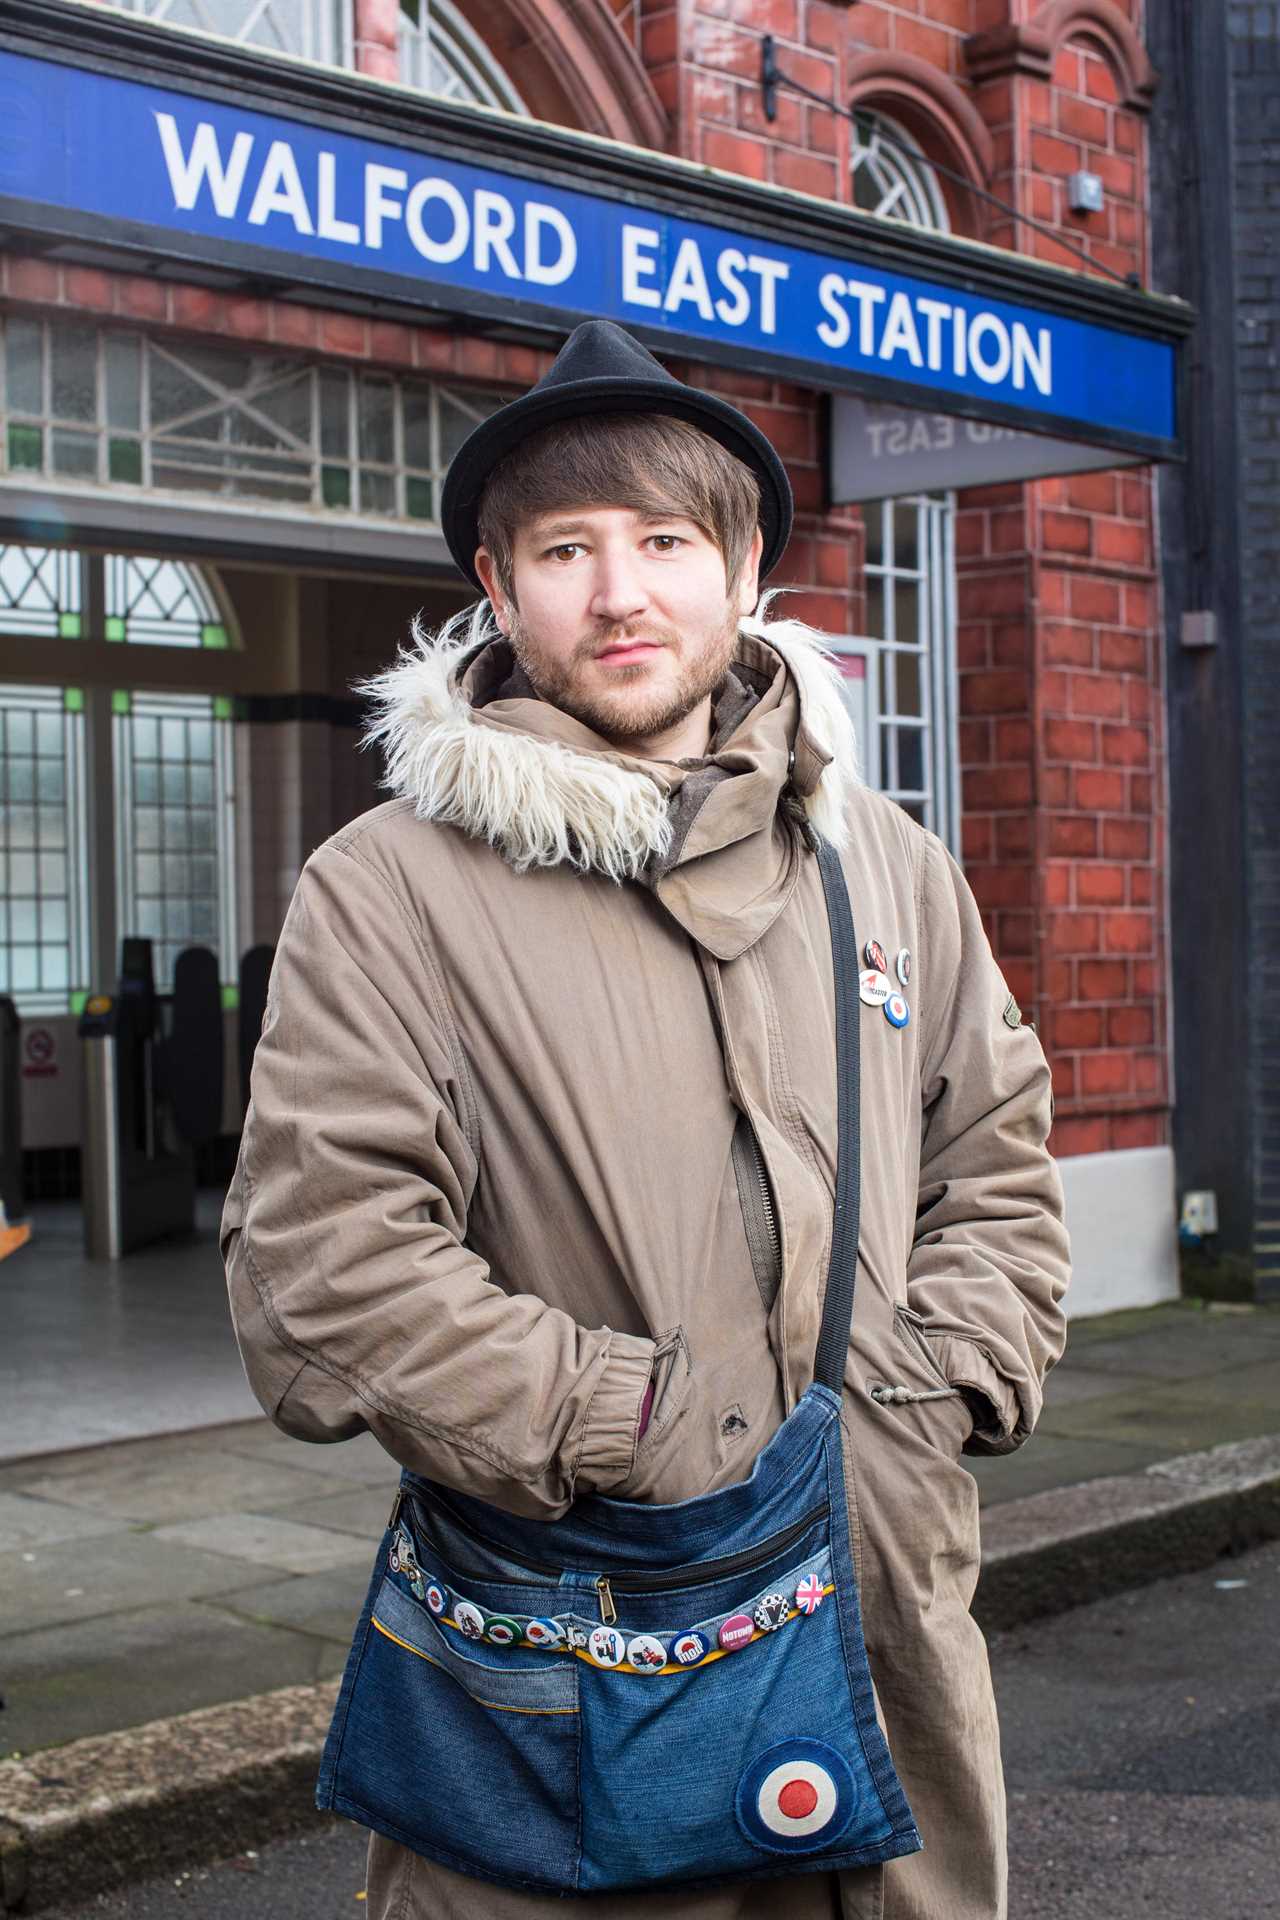 EastEnders Star Ben Champniss Confirms Future on the Show